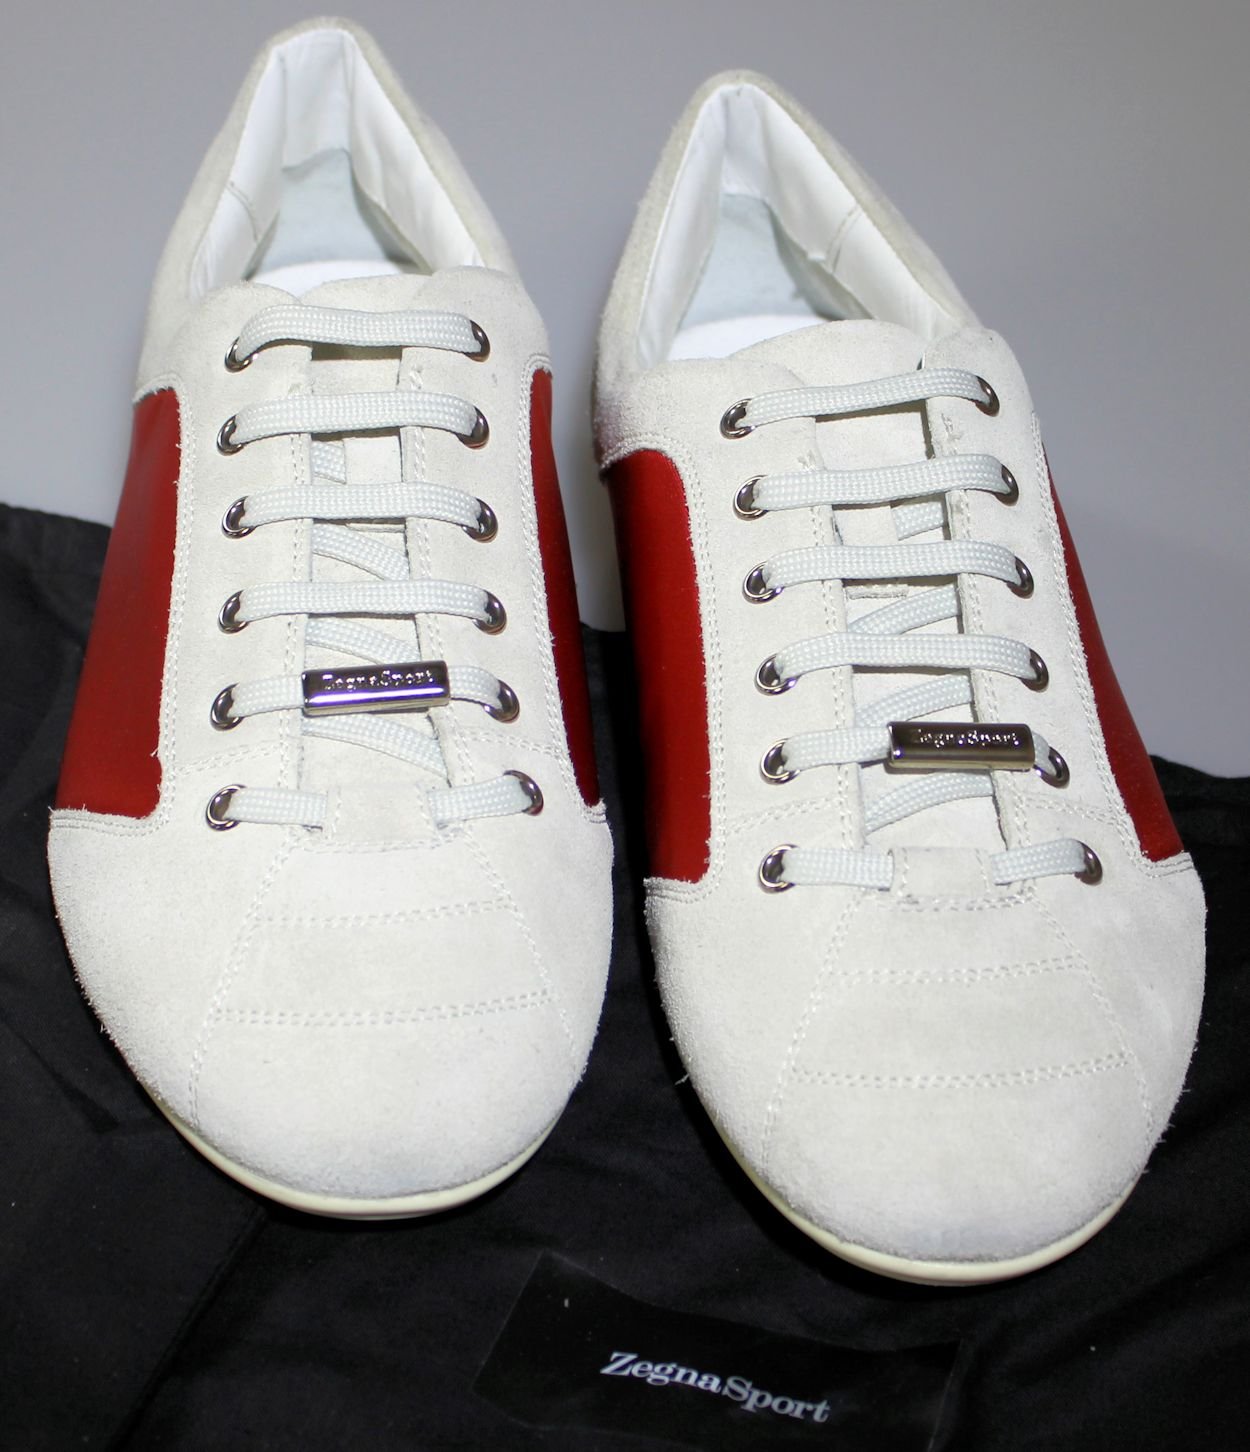 ZEGNA SPORT SHOES $445 RED/WHITE SUEDE CALF LOGO ORNAMENTED TRAINER 12 ...